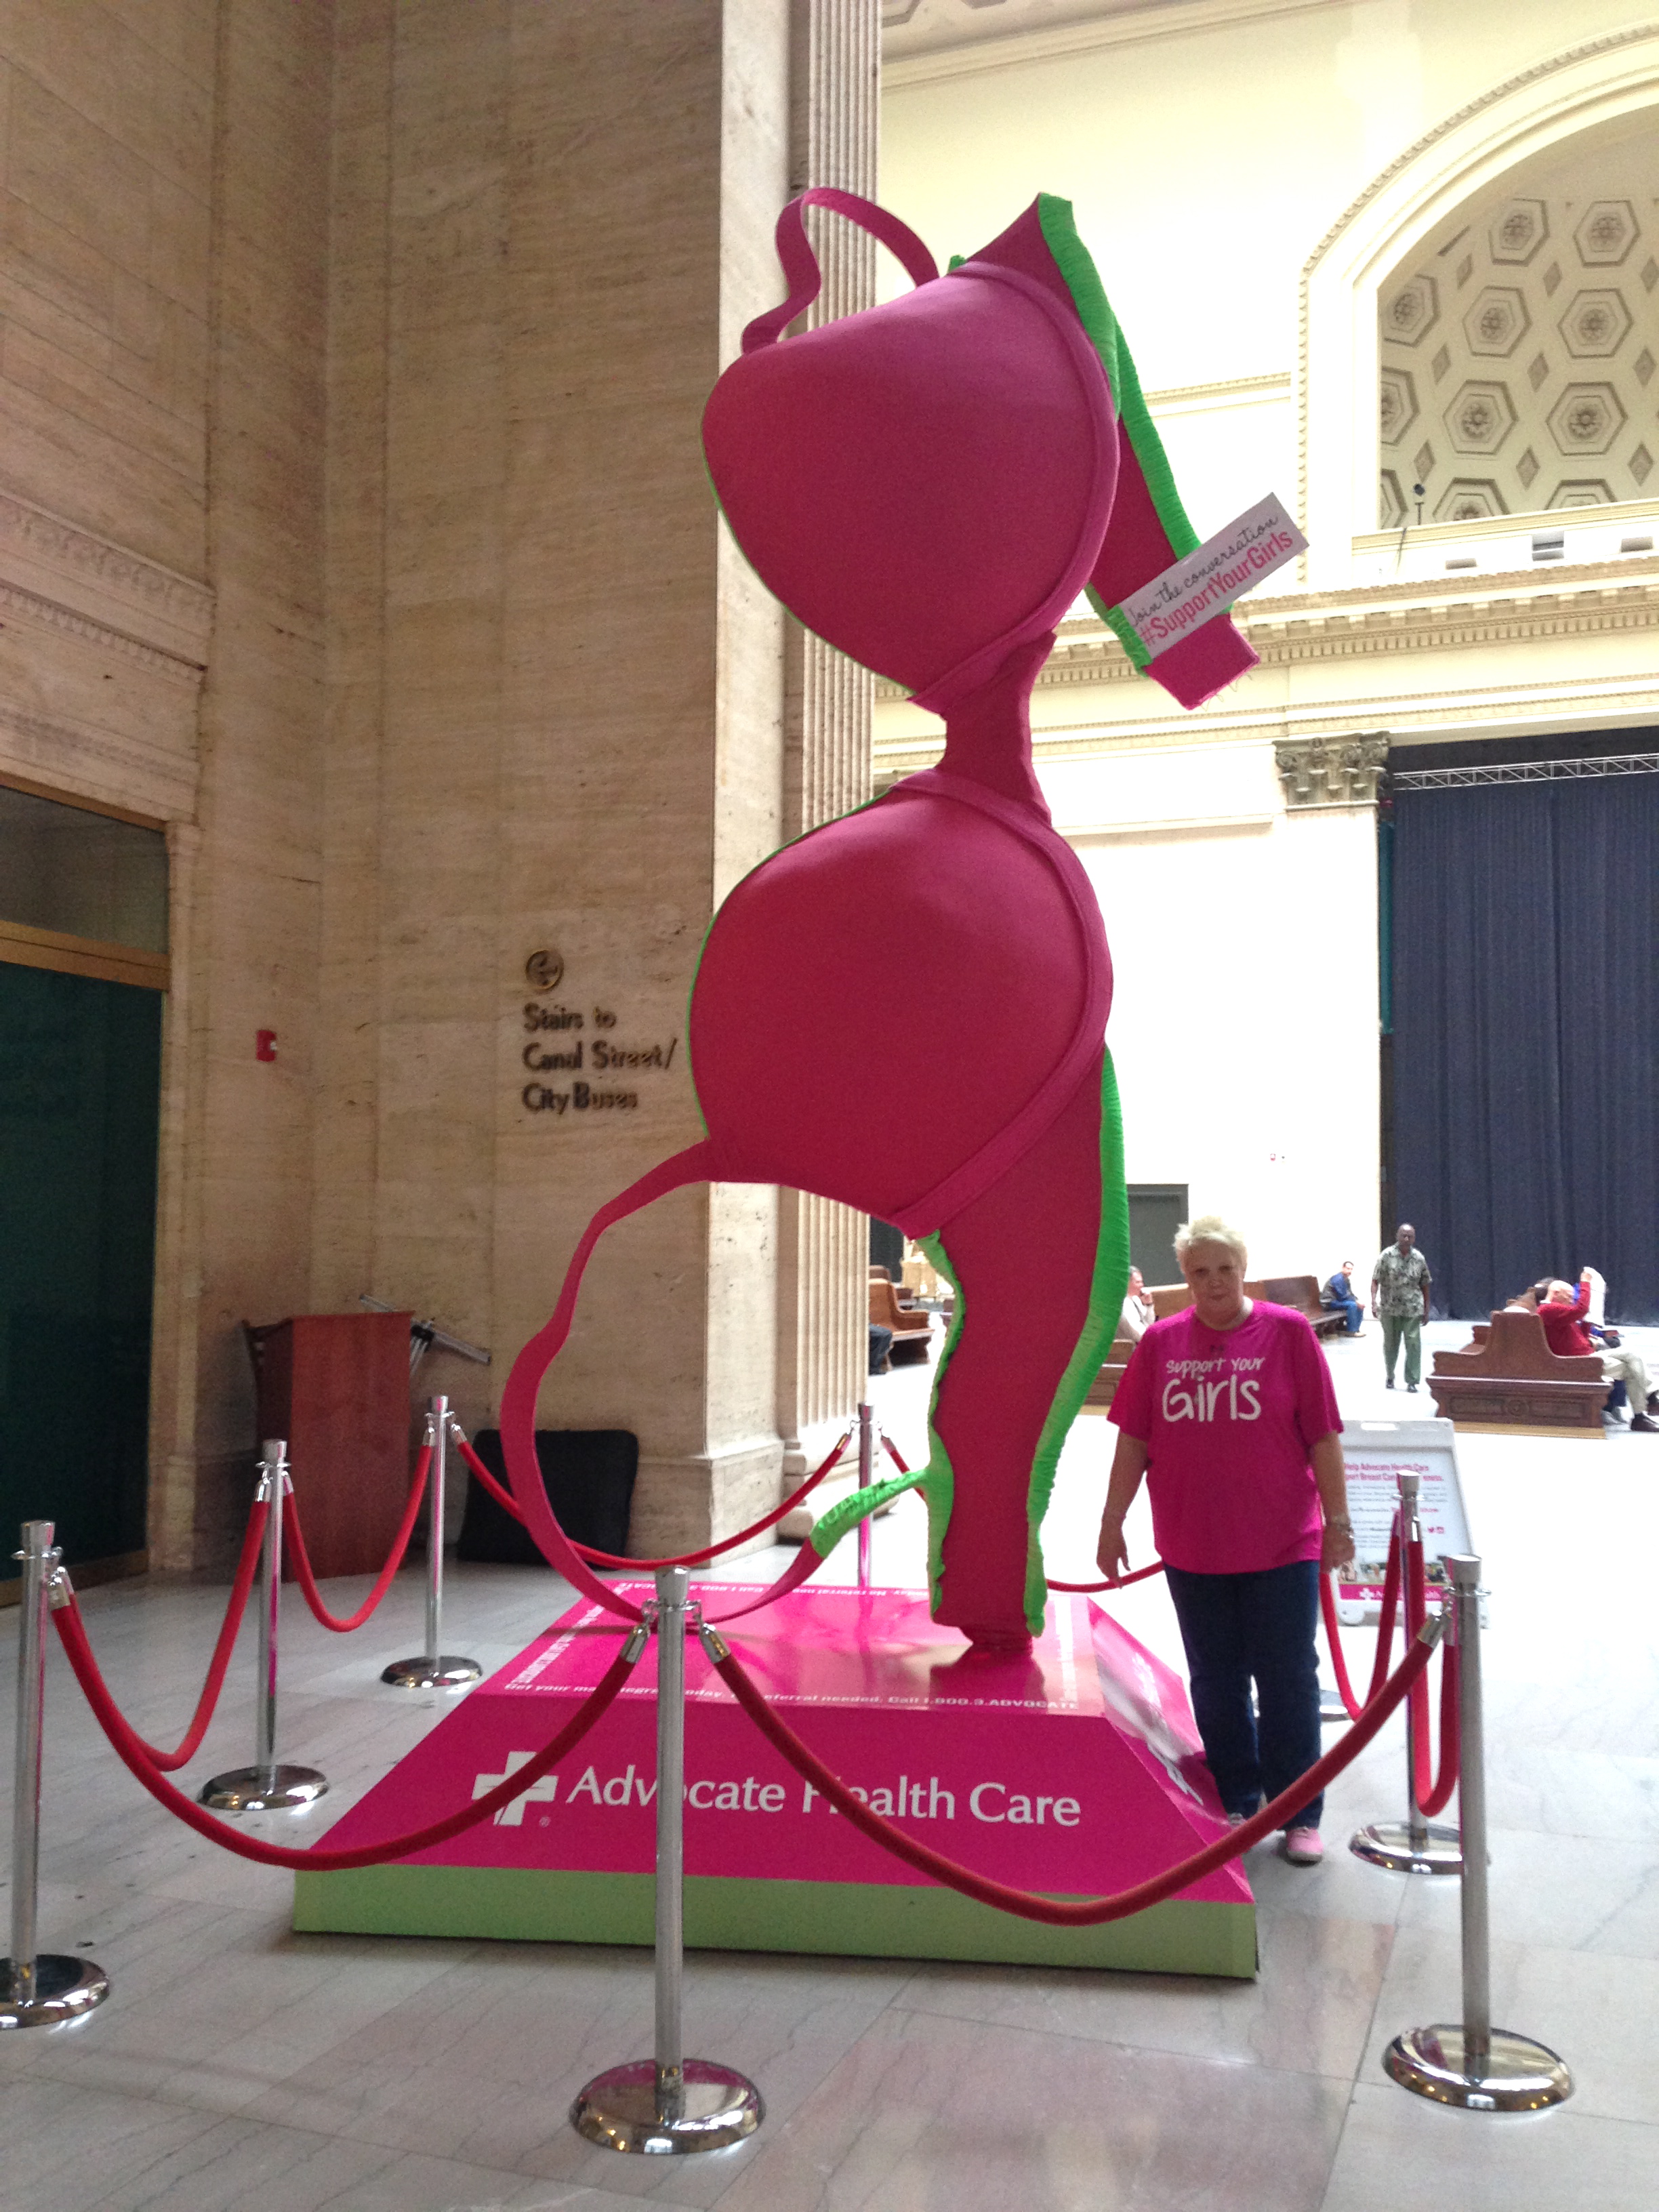 Giant bra sculpture tours Chicago for breast health – Medill